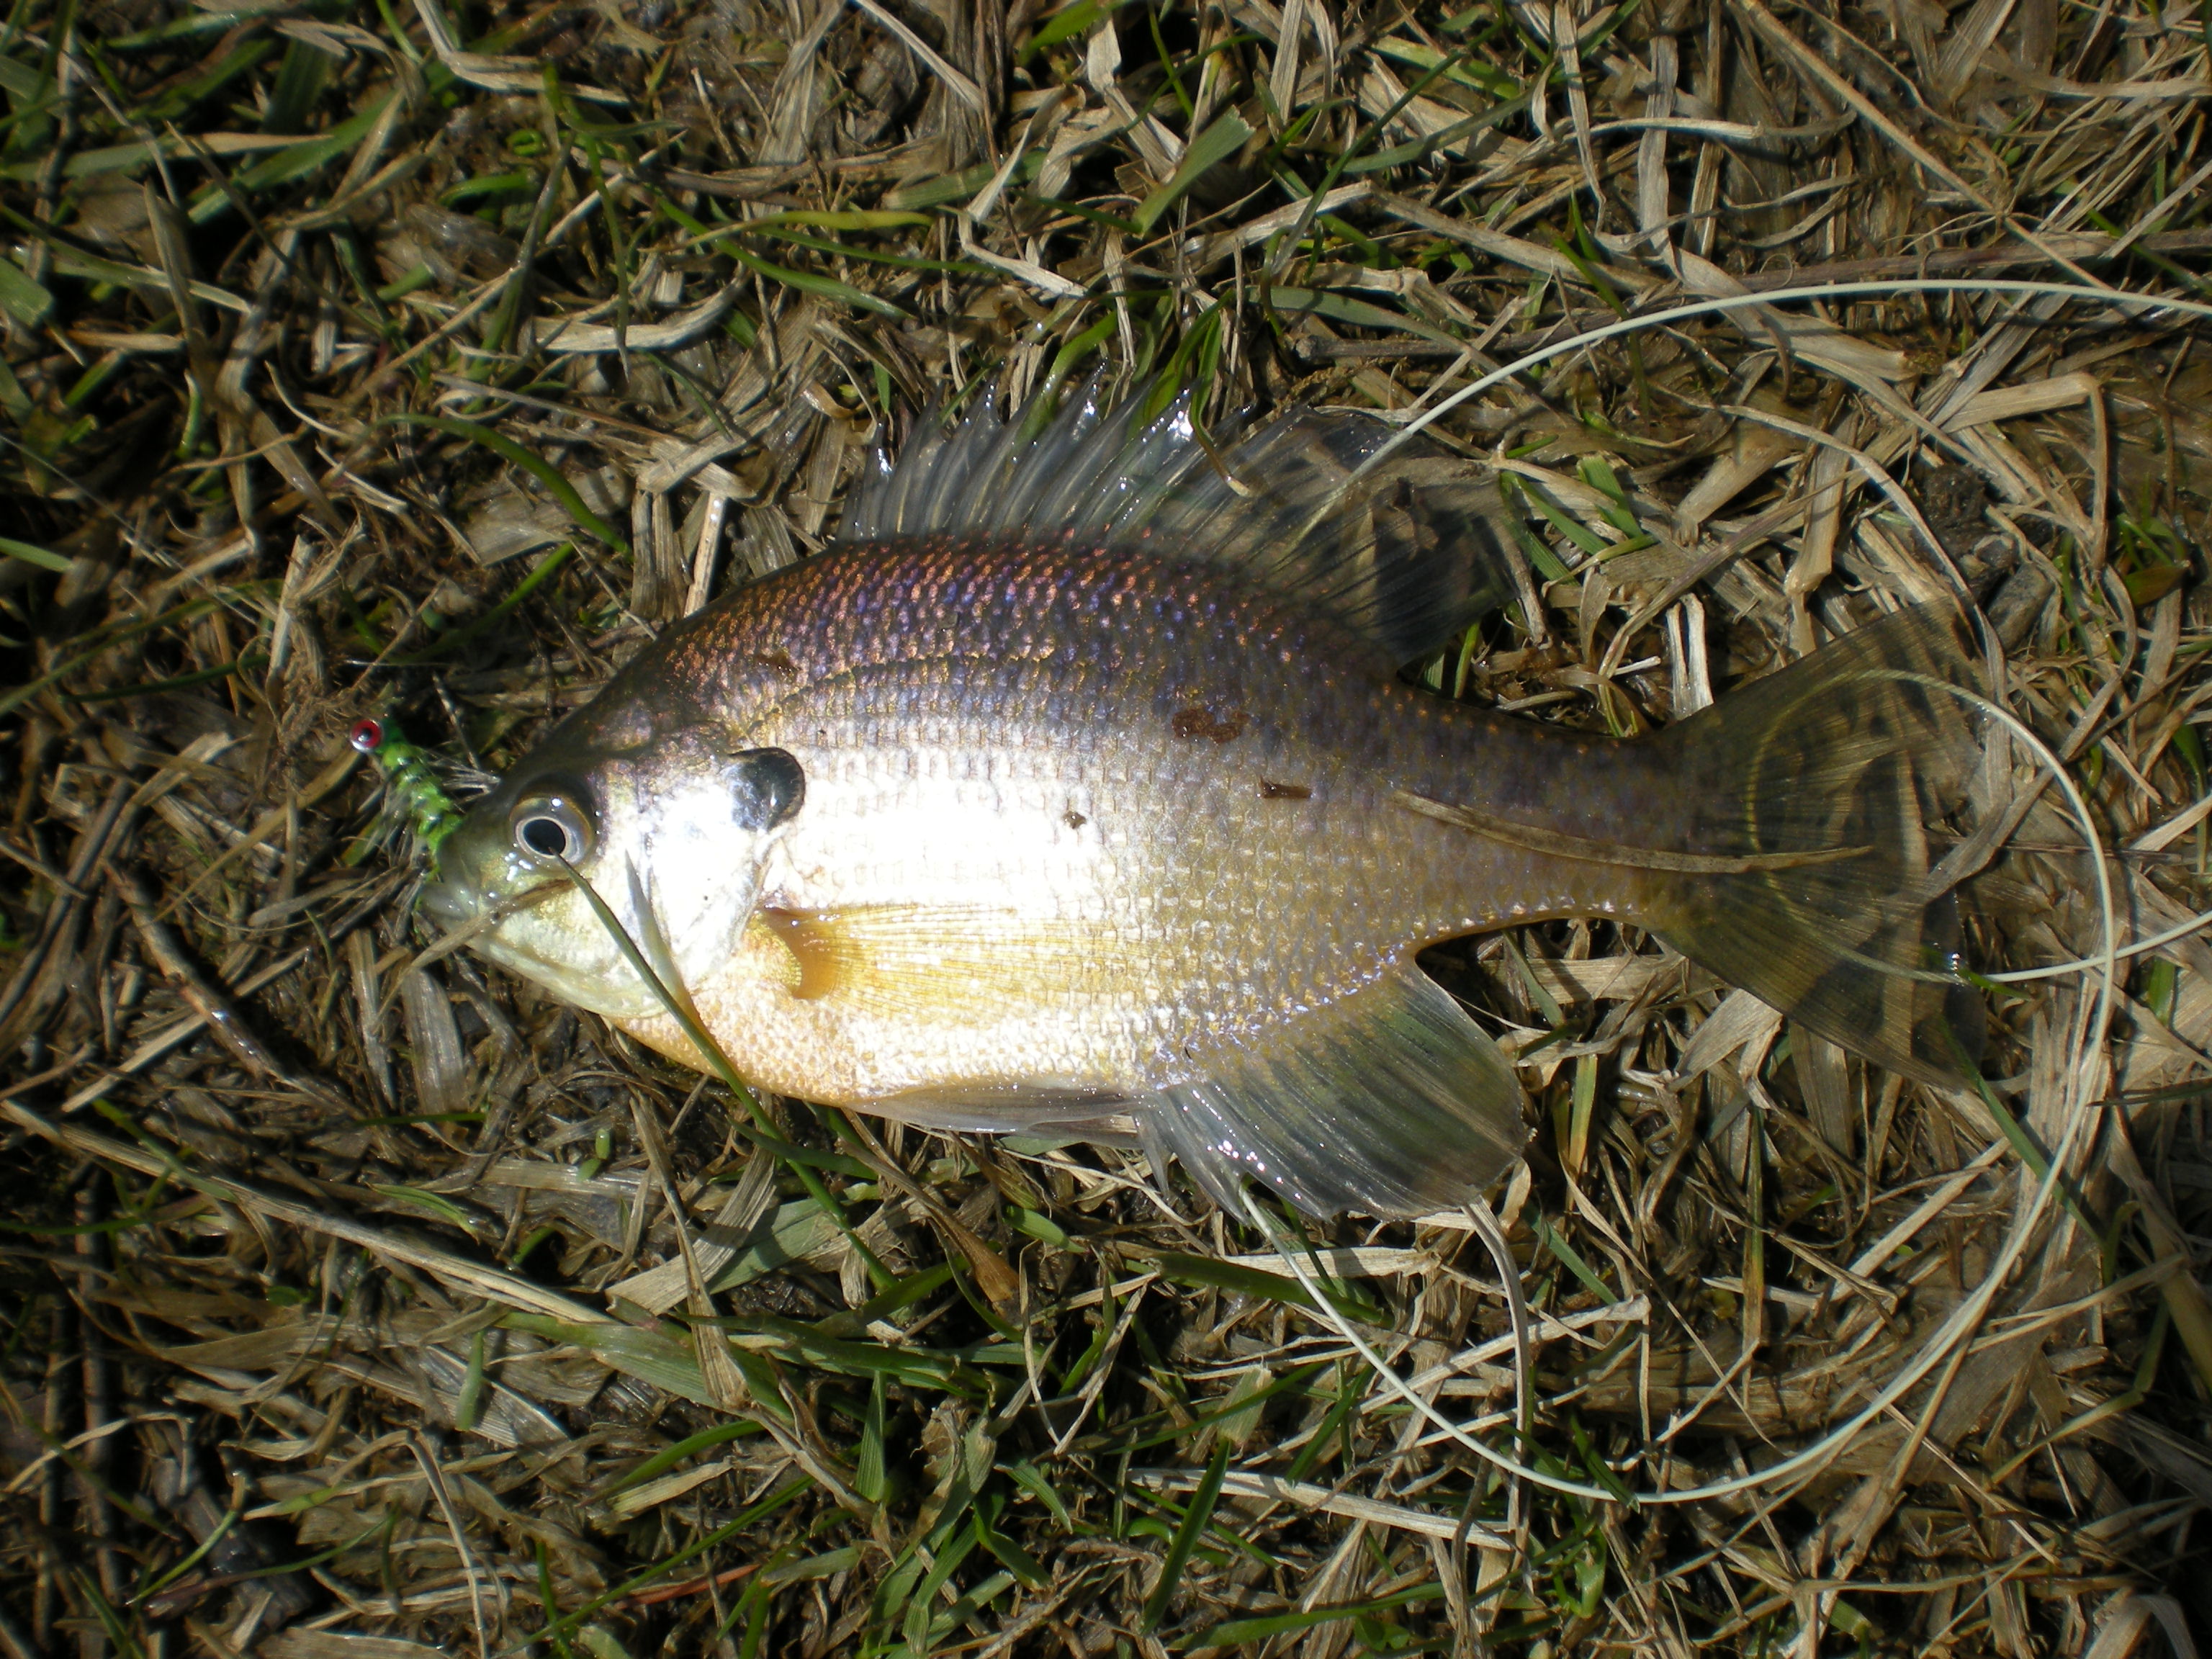 First bluegill of the season, from Sylvan Glen Lake in Troy downstate